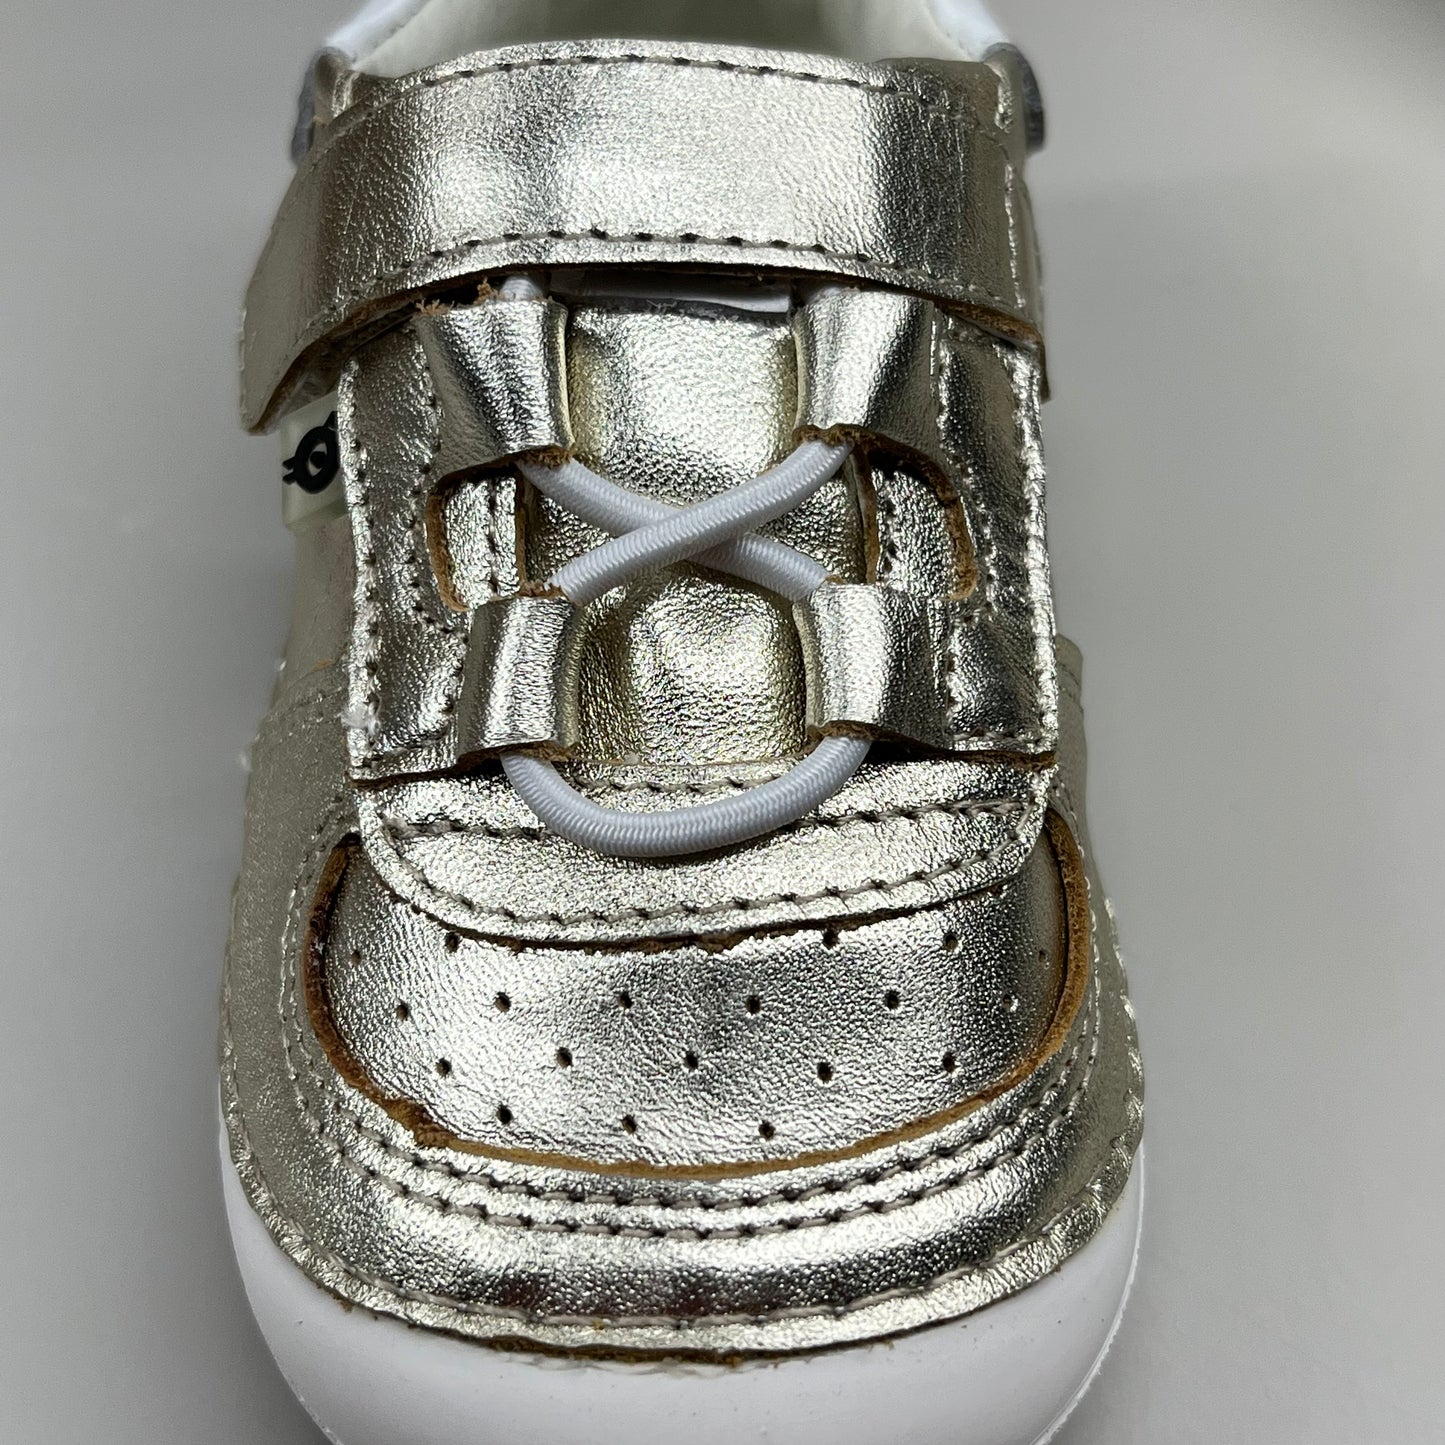 OLD SOLES Baby Rebel Pave Leather Shoe Sz 24 US 8 Gold/White #4090